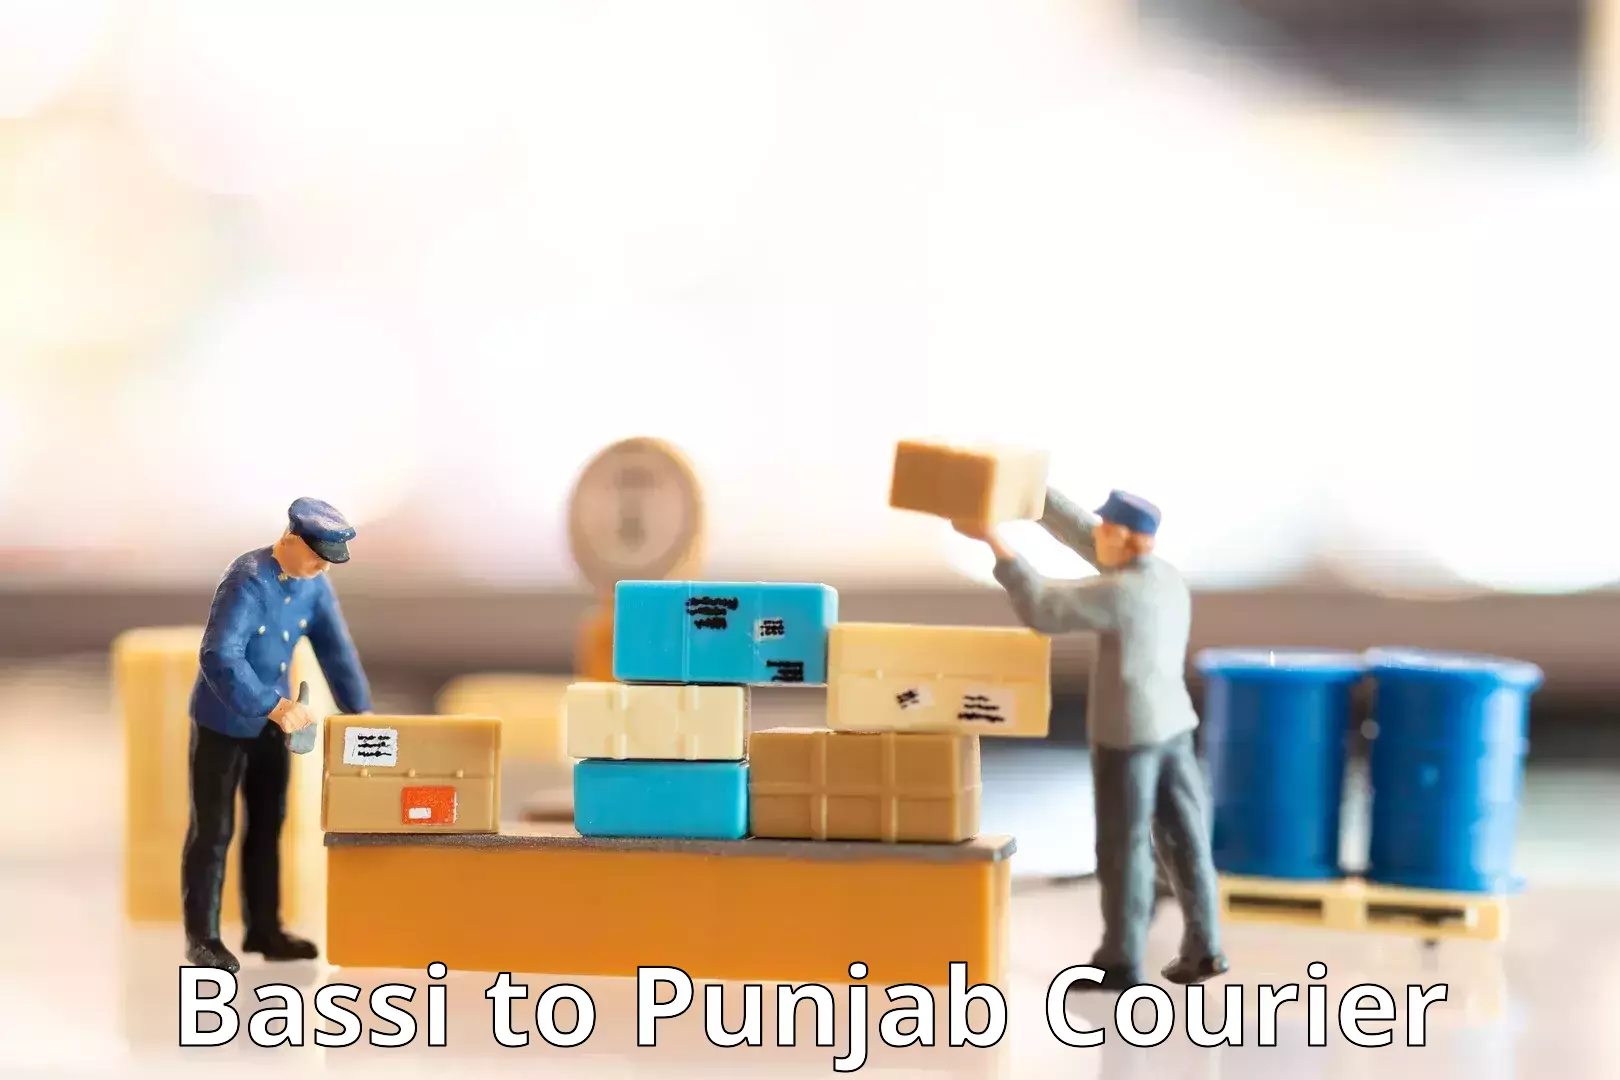 Automated parcel services Bassi to Punjab